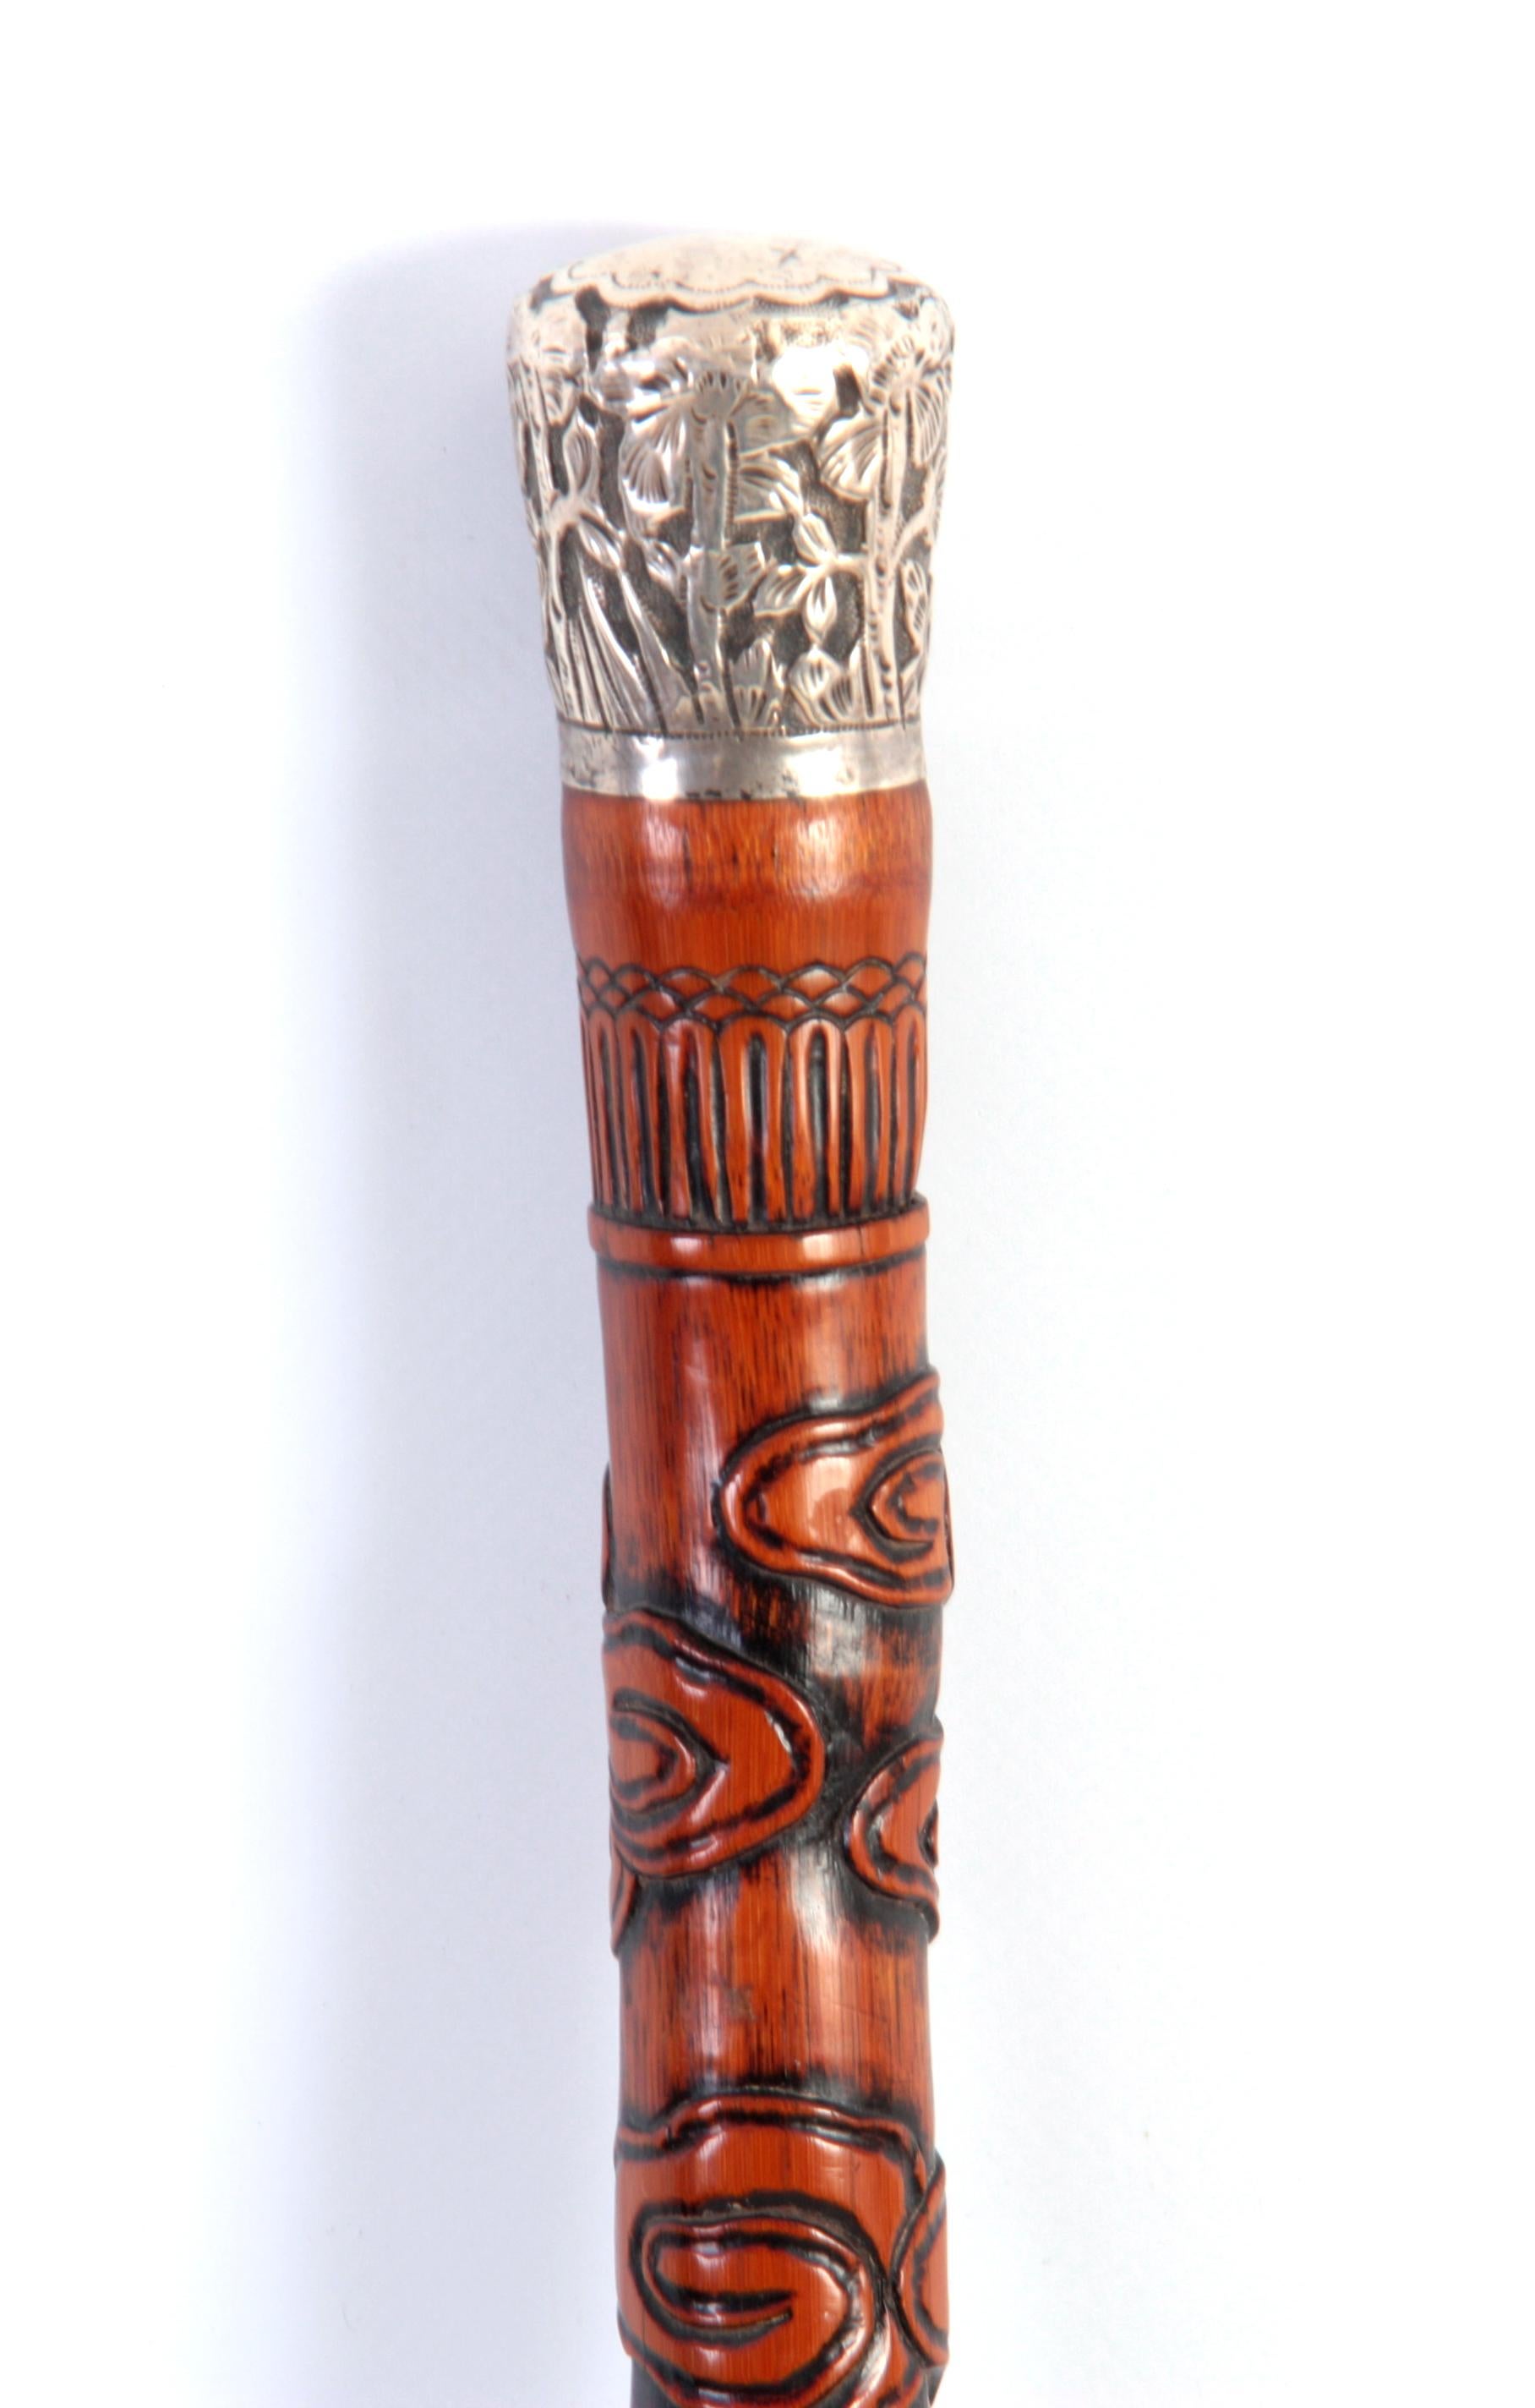 This is a superb Chinese sterling silver-mounted Malacca walking stick, circa 1880 in date.
 
This decorative walking cane features a splendid globular sterling silver pommel which is cast with exquisite leaf decoration.
 
The sturdy Malacca